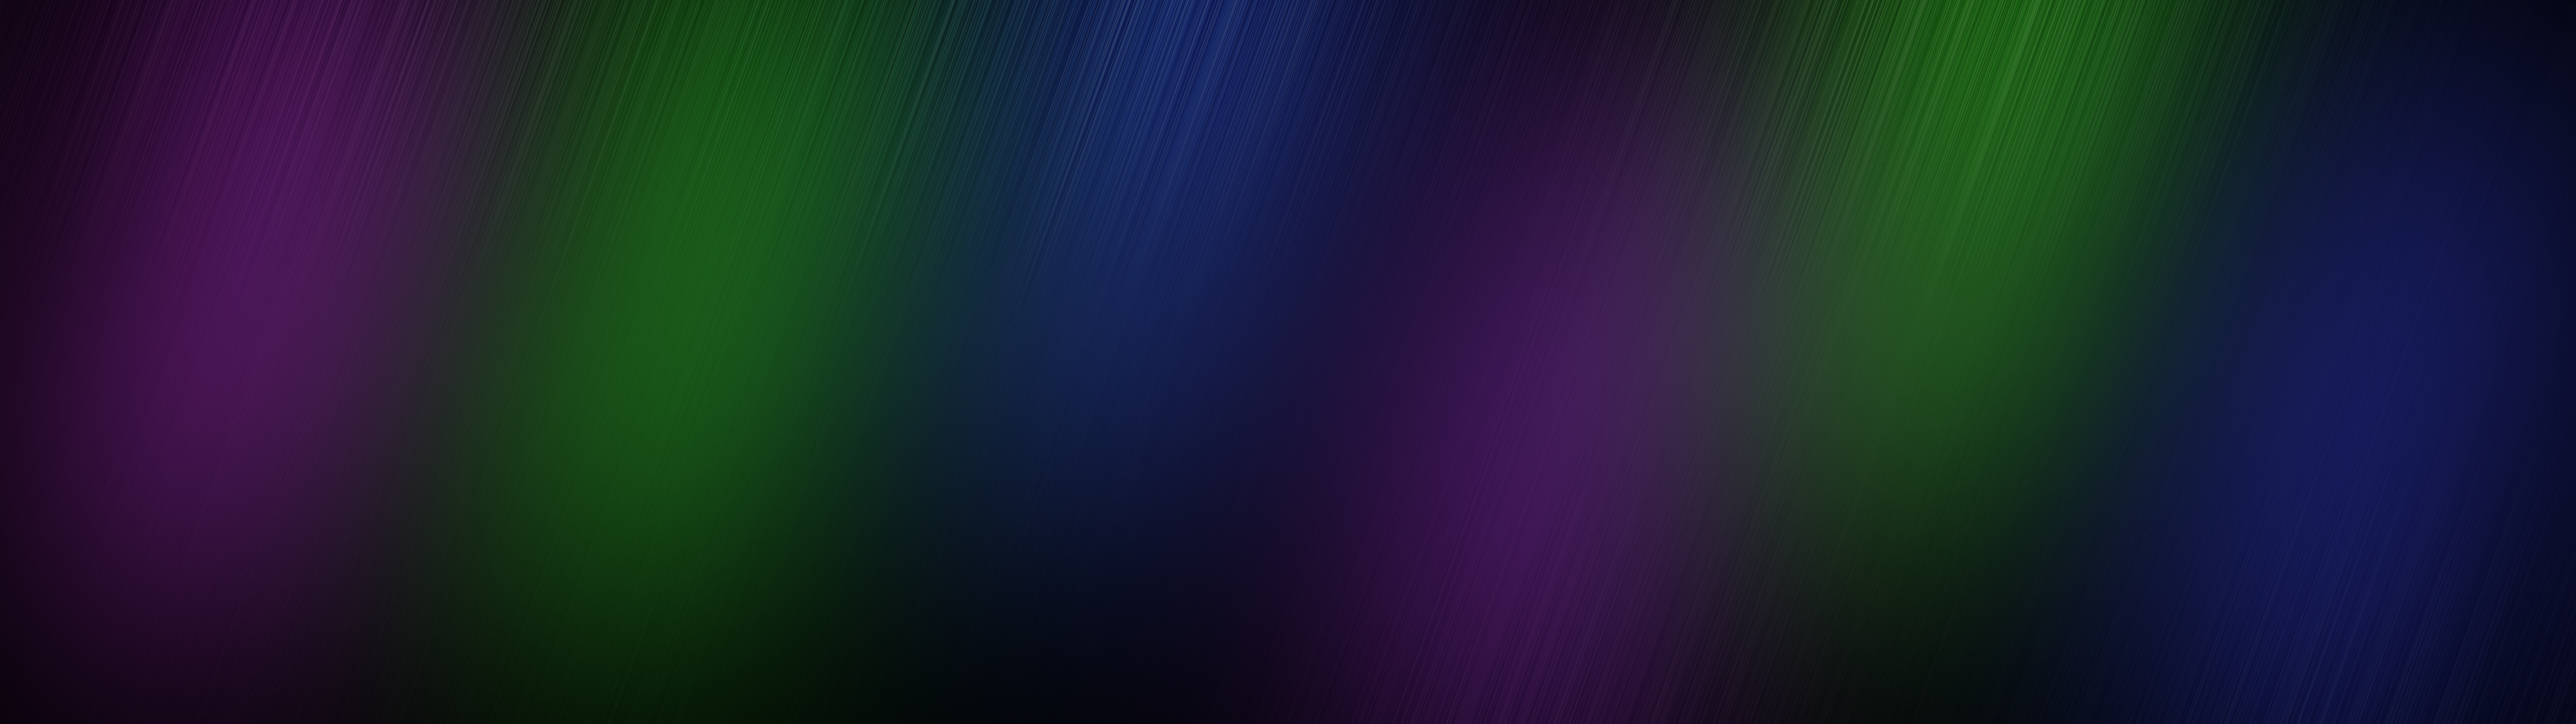 Colors HD Wallpaper | Background Image | 3840x1080 | ID:175120